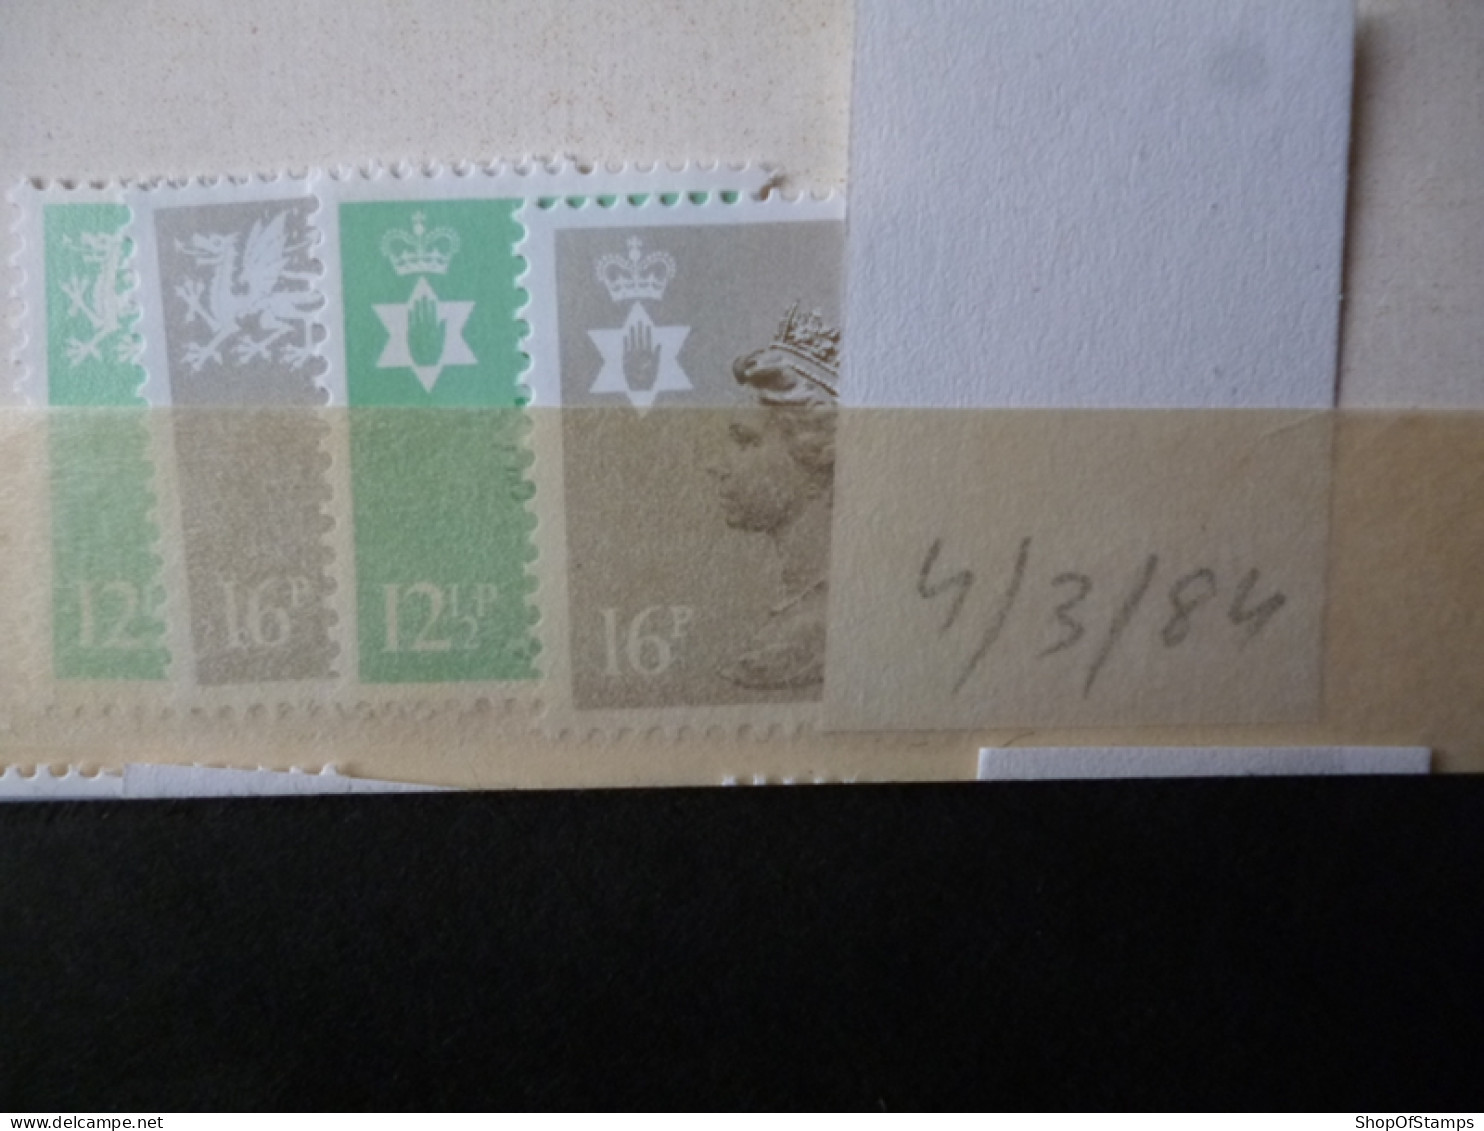 GREAT BRITAIN SG X 1984 28.2.84  MINT DEFI ISSUE FROM GPO IN ENVELOPE - Máquinas Franqueo (EMA)